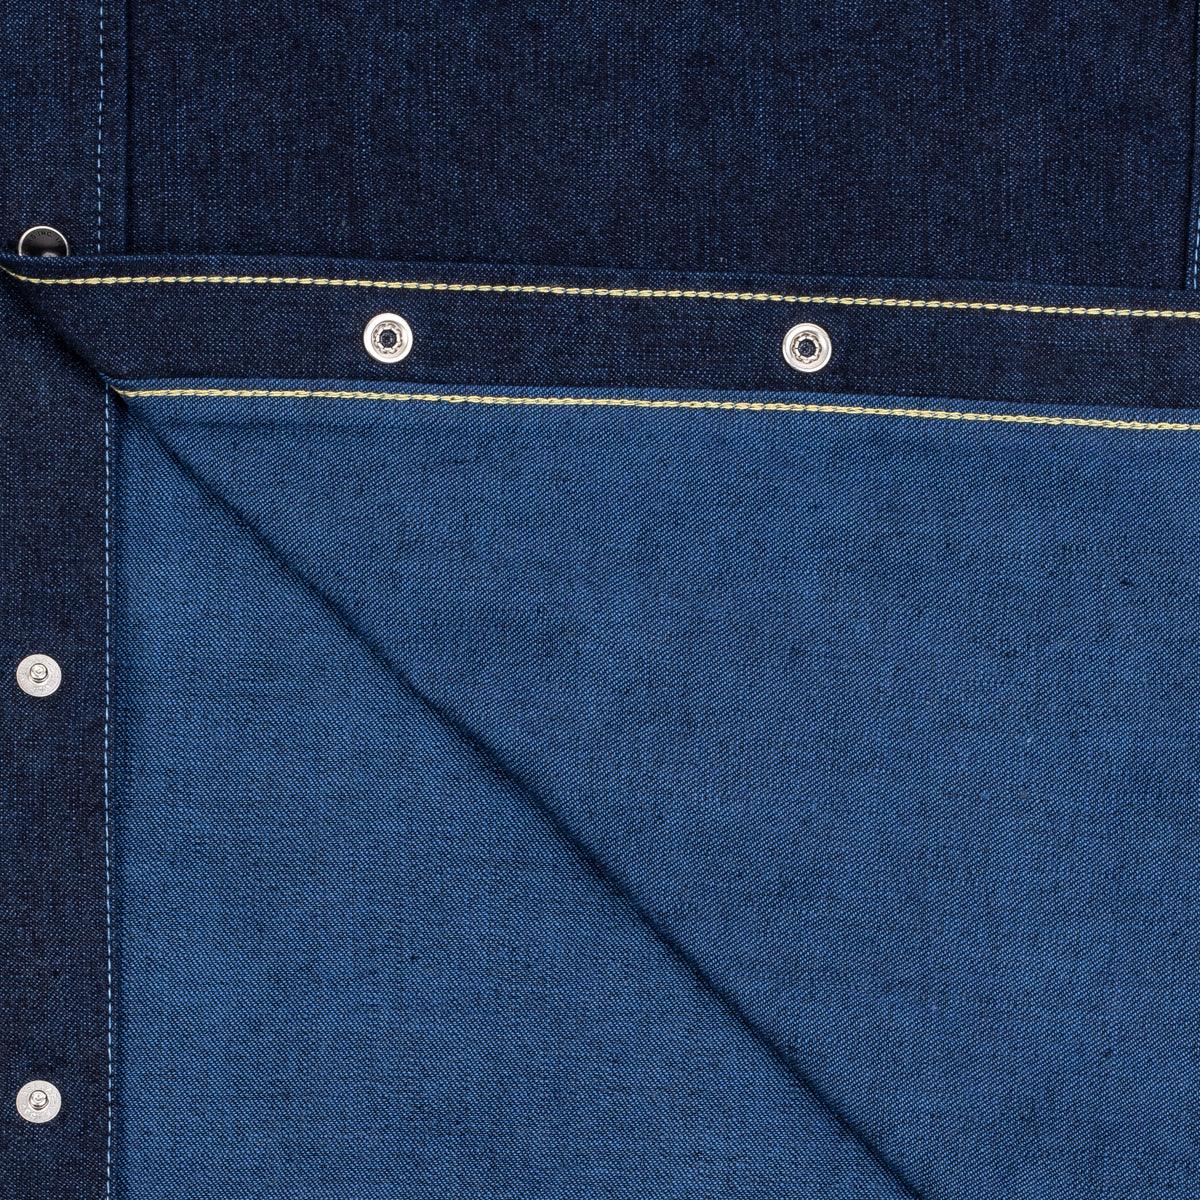 Image showing the IHSH-352-BLU - 10oz Selvedge Denim Western Shirt - Indigo Overdyed Blue which is a Shirts described by the following info Iron Heart, Released, Shirts, Tops and sold on the IRON HEART GERMANY online store